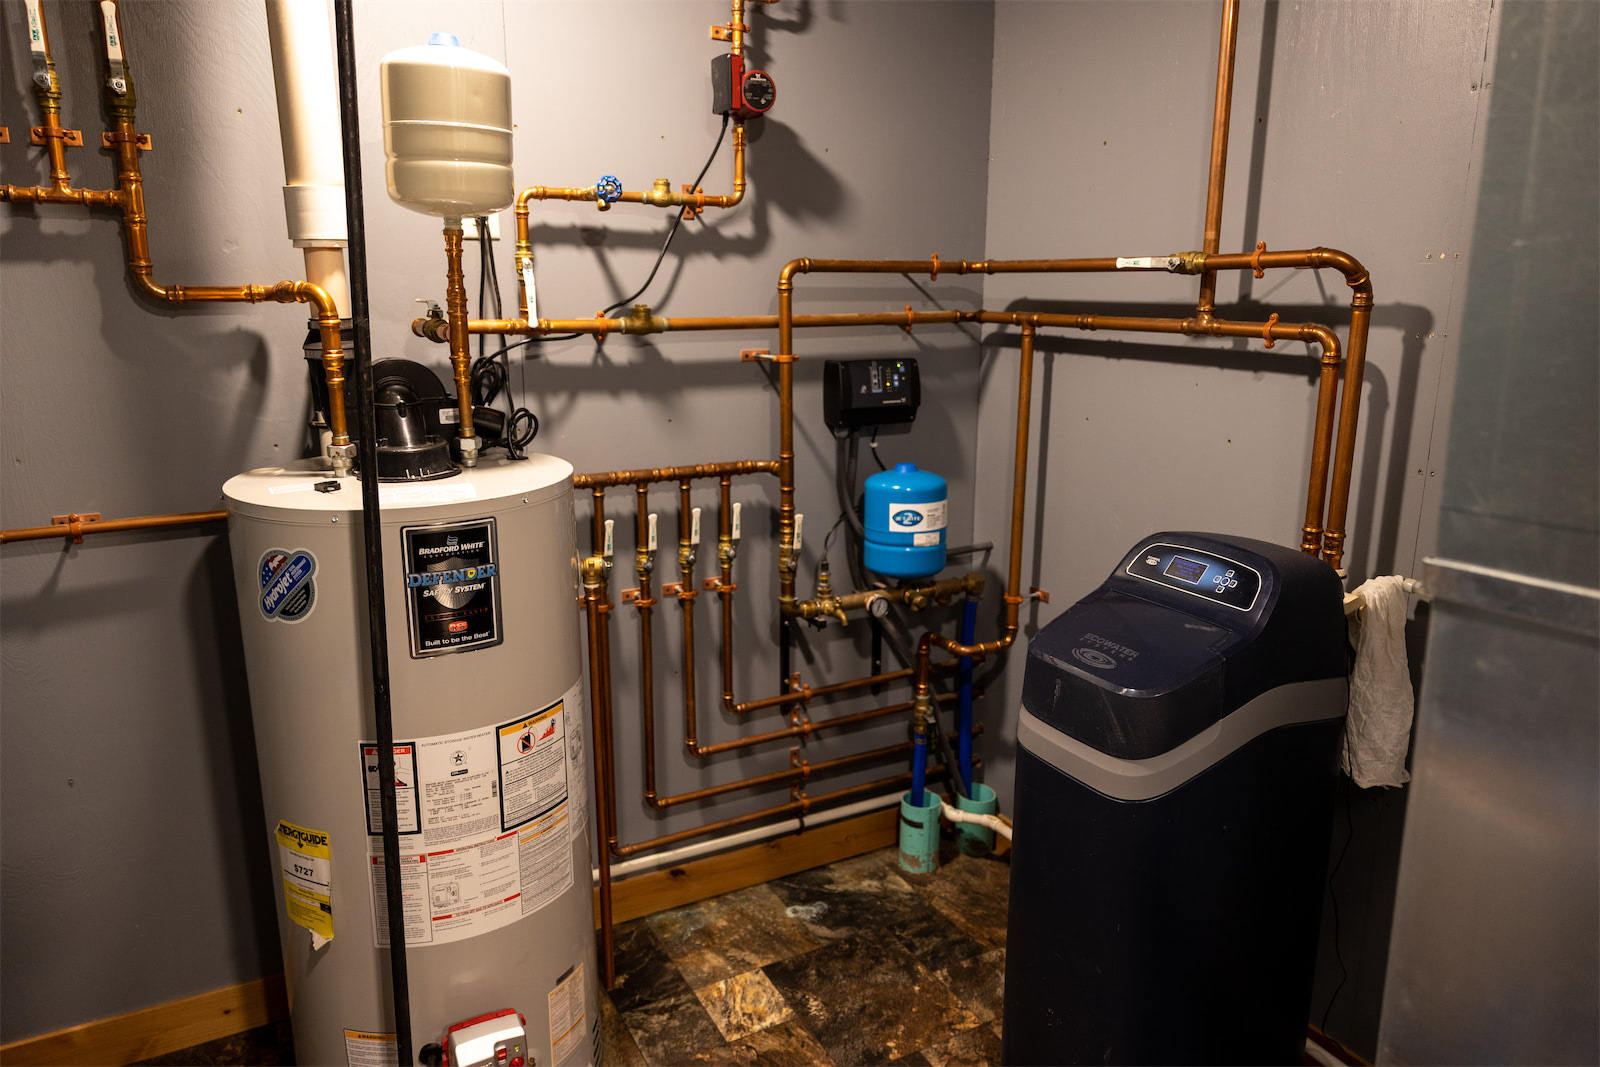 A utility room with an ecowater system filtration system and hot water heater.